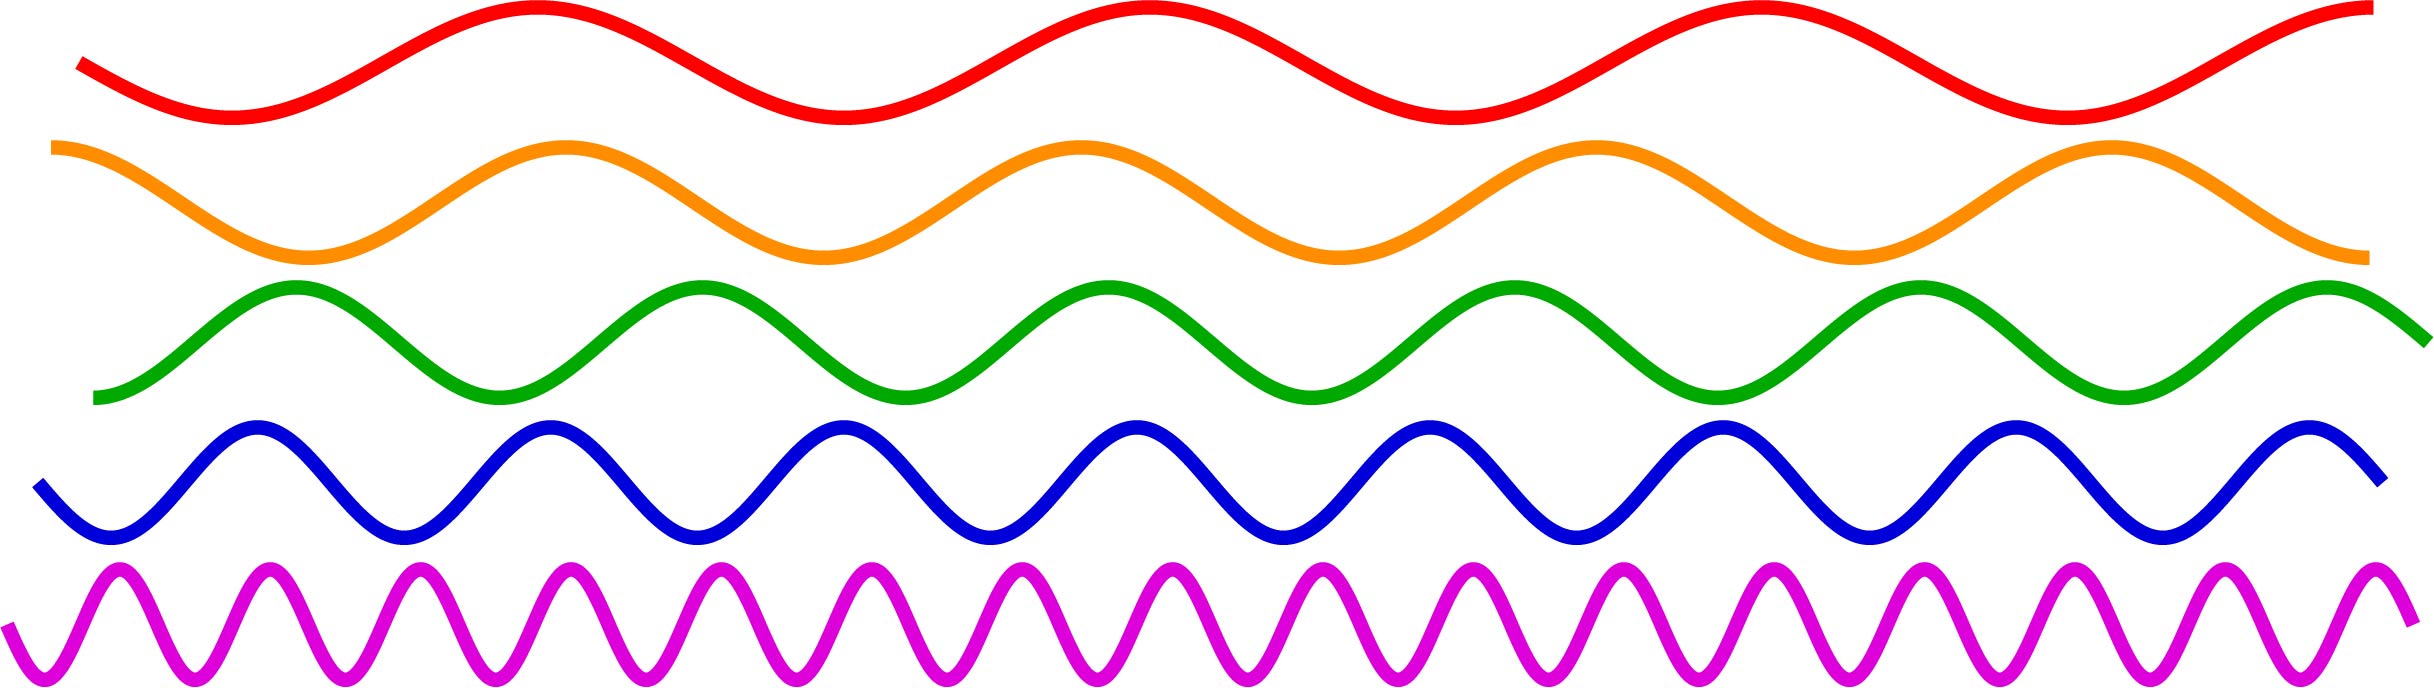 As the wavelength of a light wave decreases, its frequency increases. The red light wave has a the highest wavelength and lowest frequency of the waves shown here, while the violet light wave has the lowest wavelength and highest frequency.